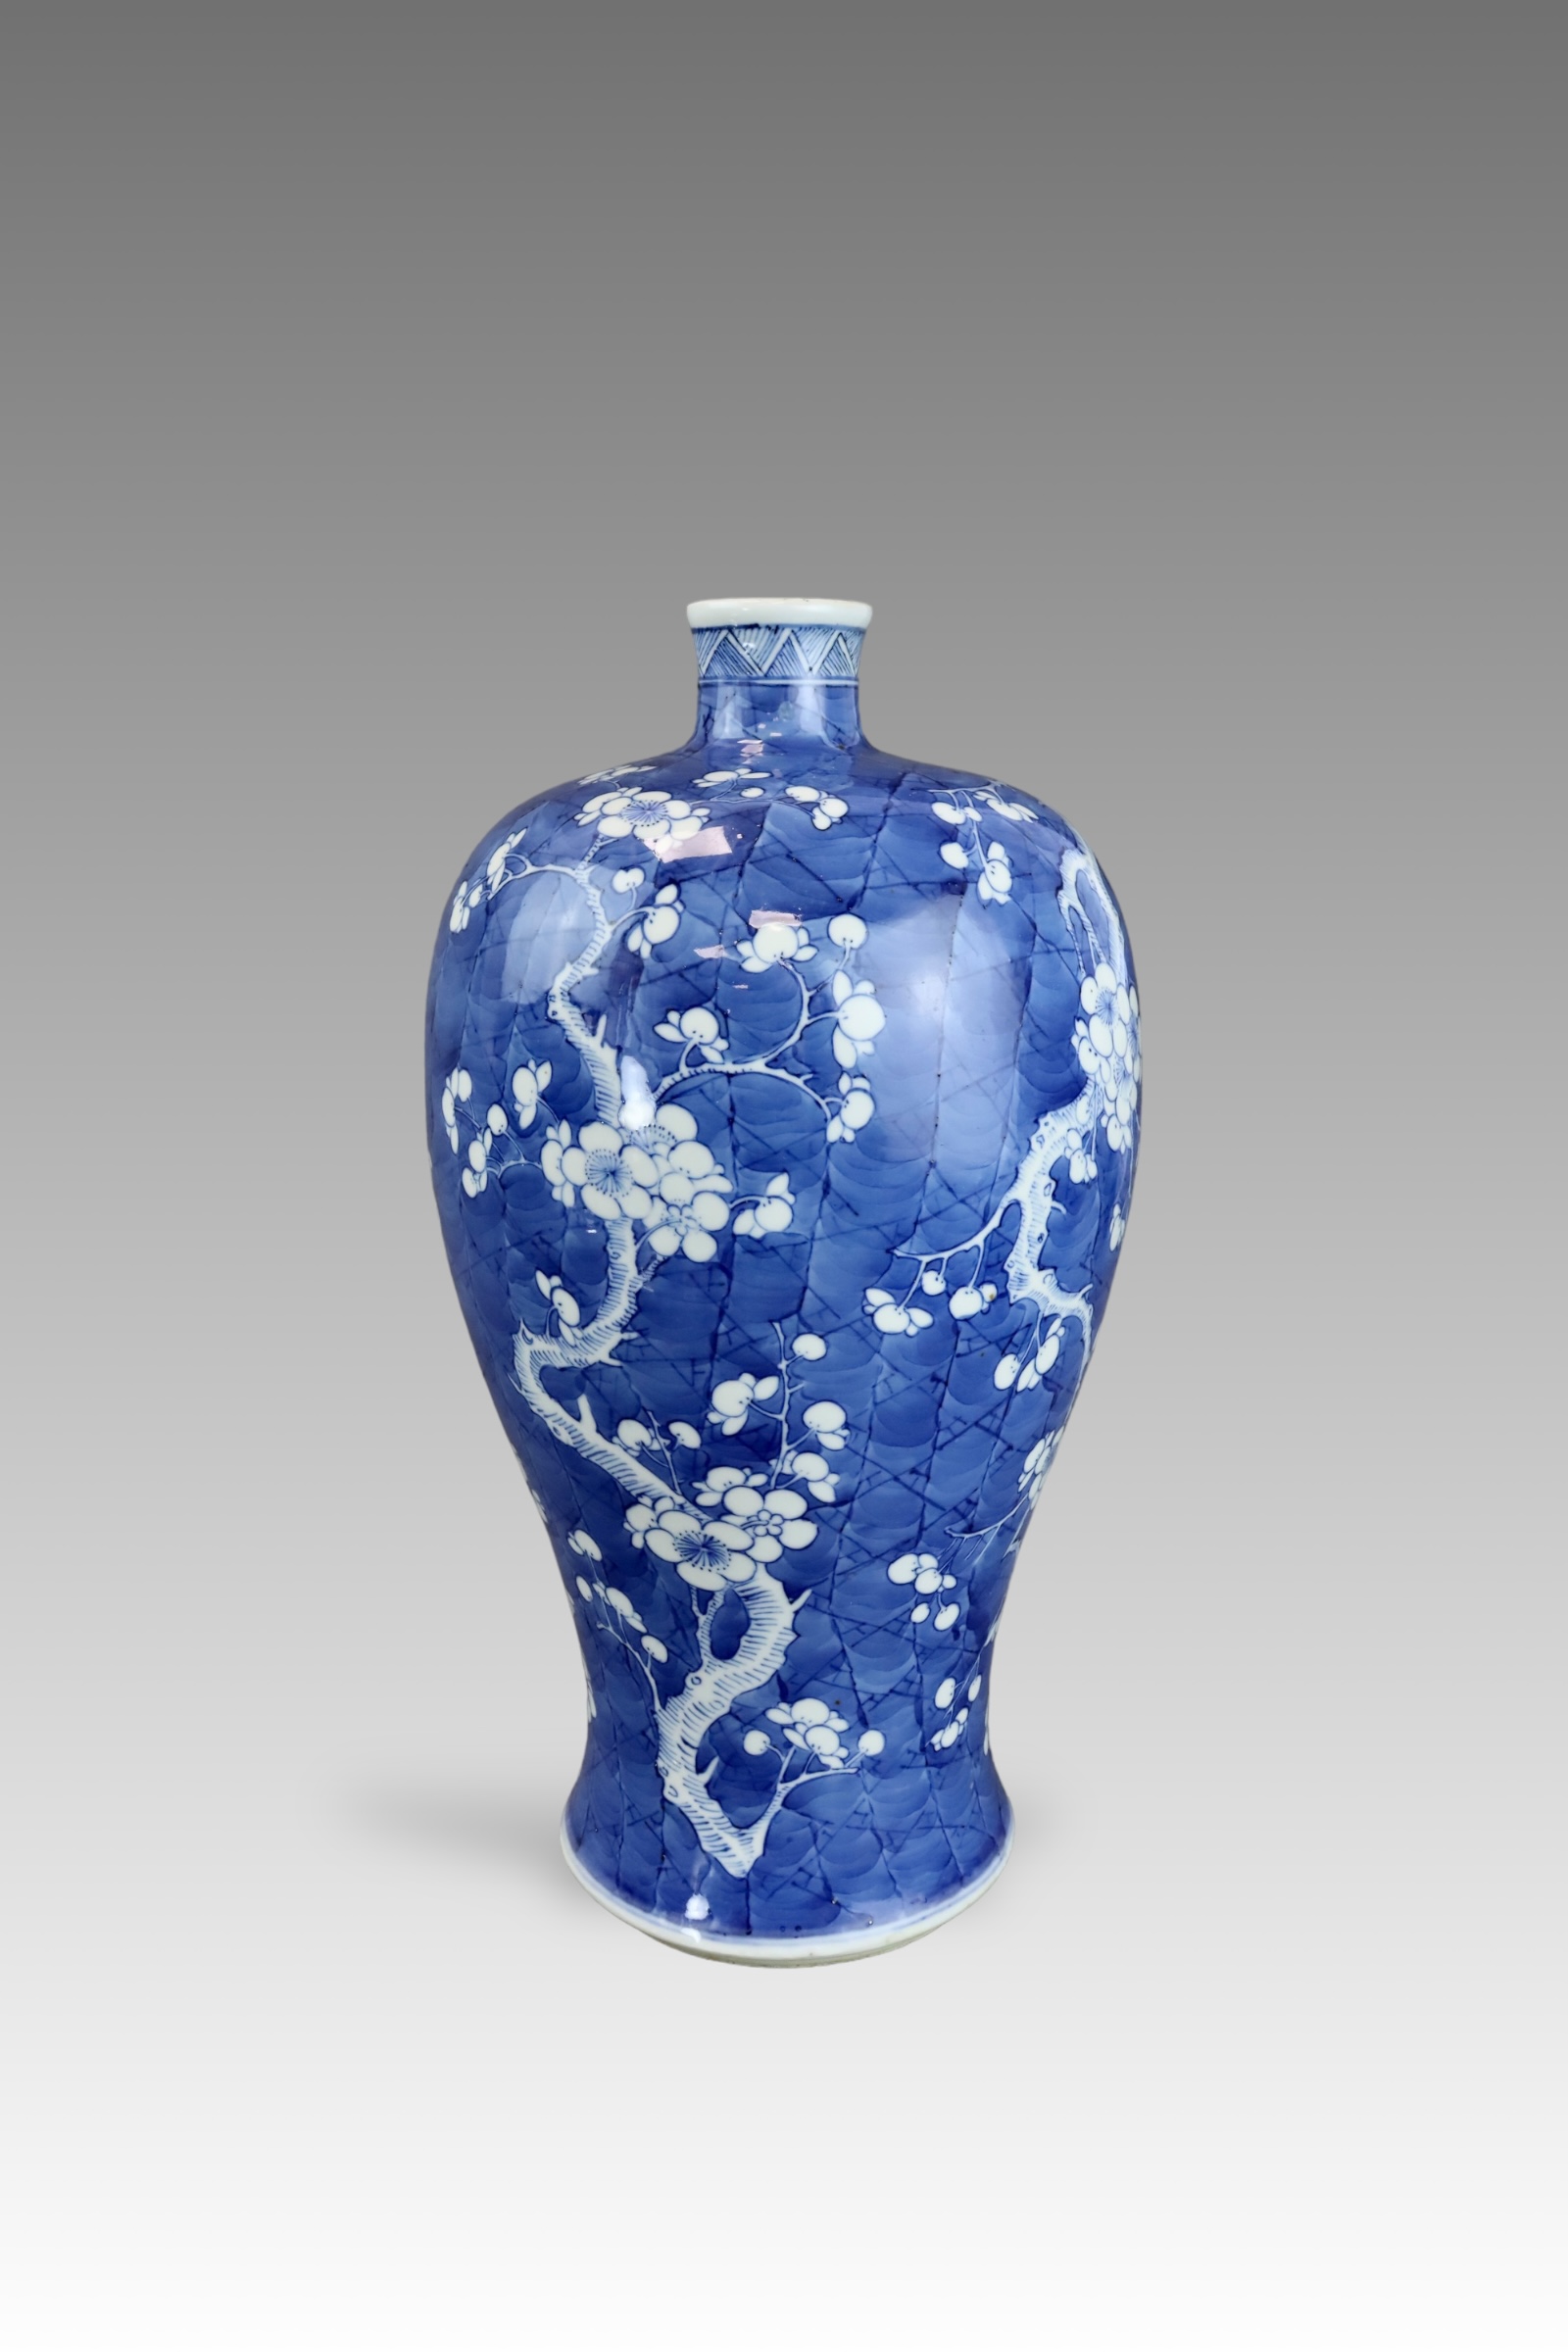 A Blue and White Vase with Prunus, 19th century